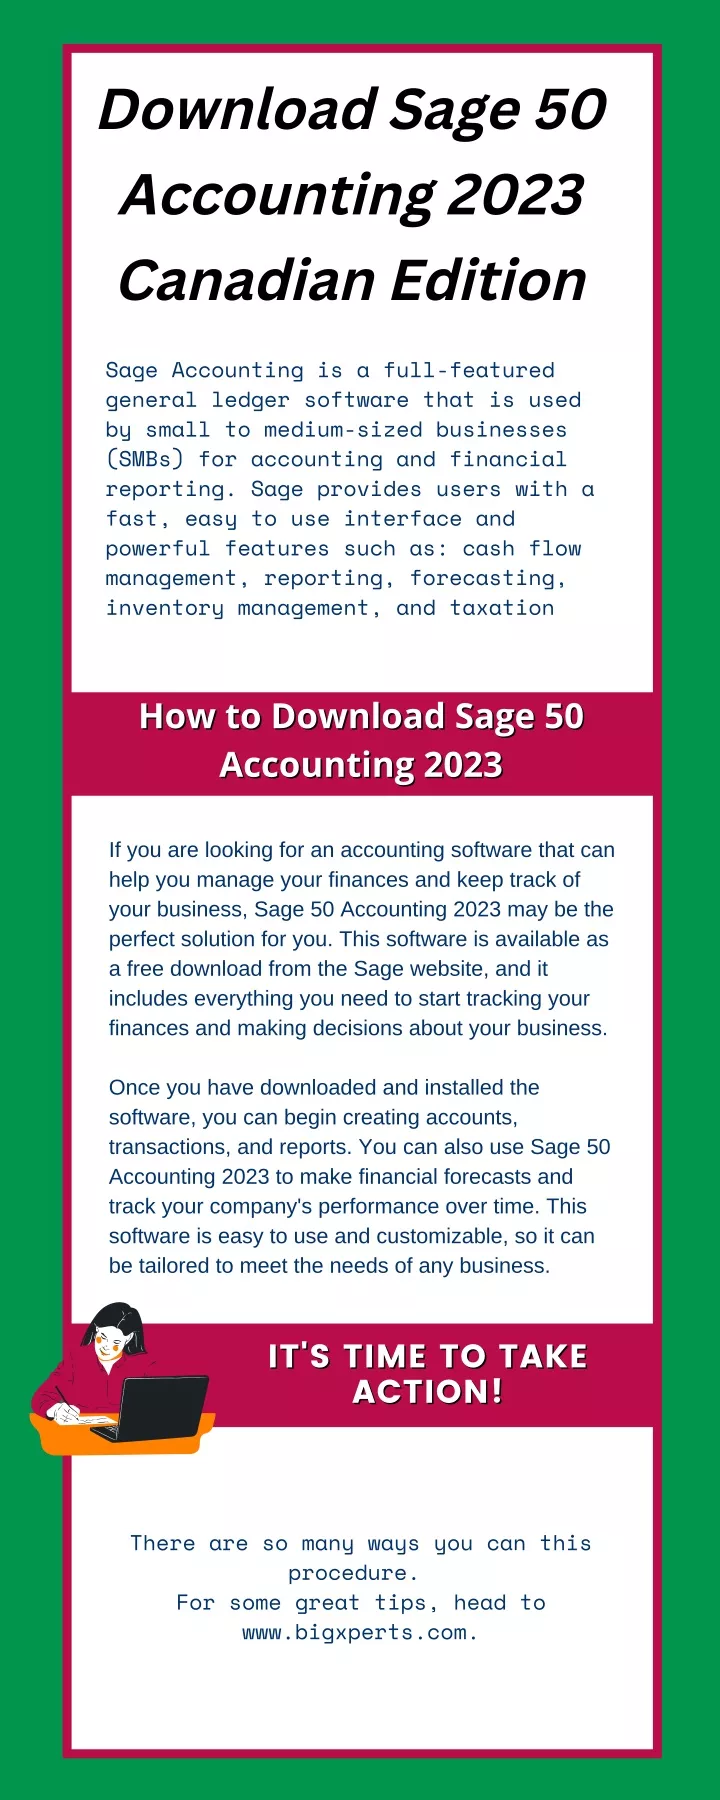 download sage 50 accounting 2023 canadian edition